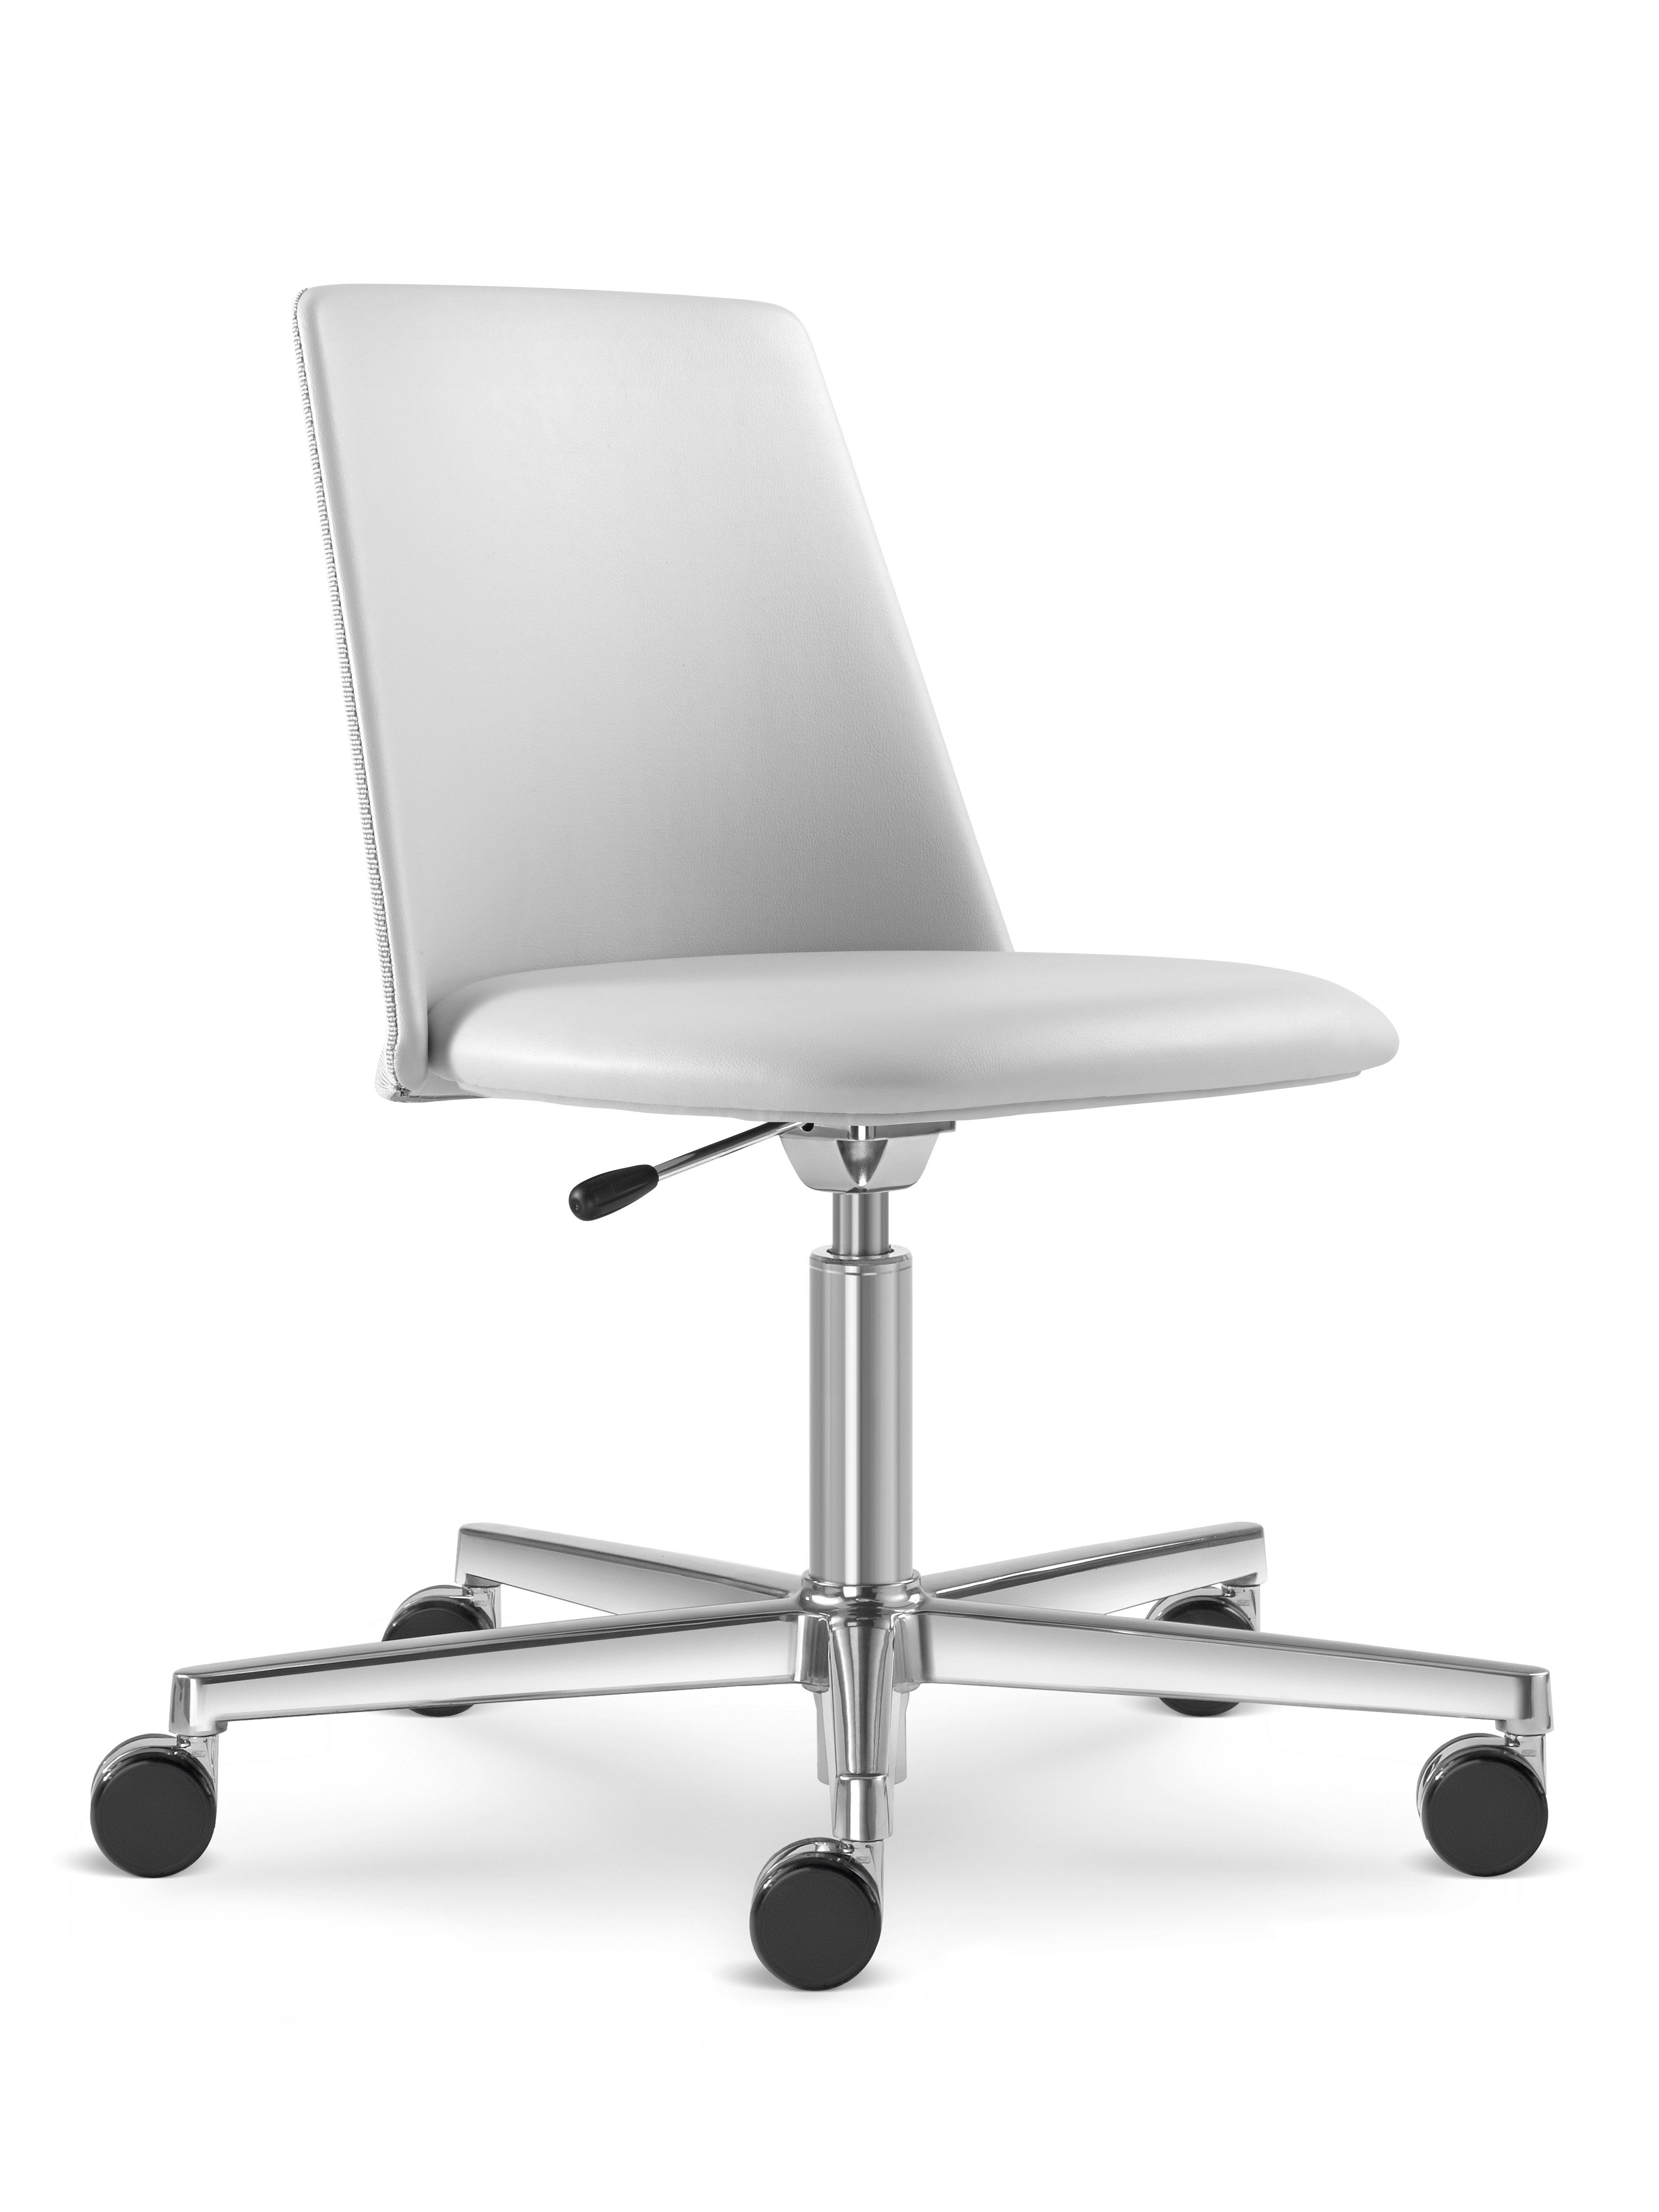 LD SEATING - Židle MELODY CHAIR 361, F37-N6 - 